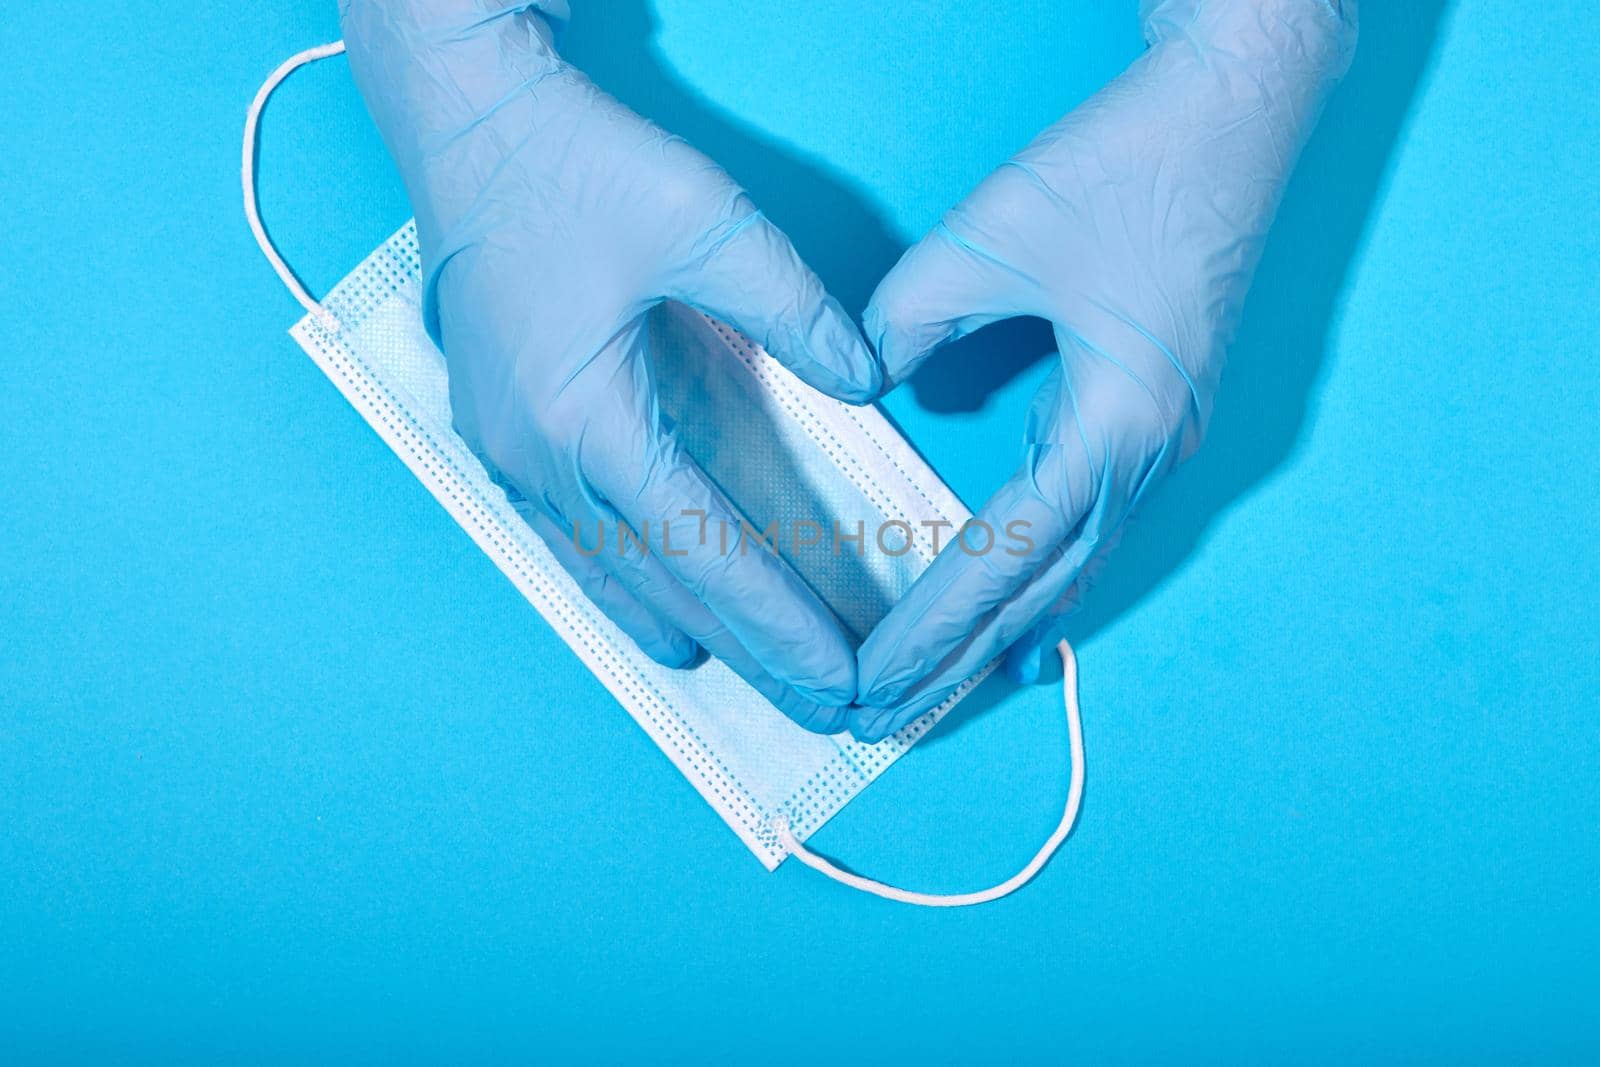 Hands in latex gloves medical mask blue background by Demkat